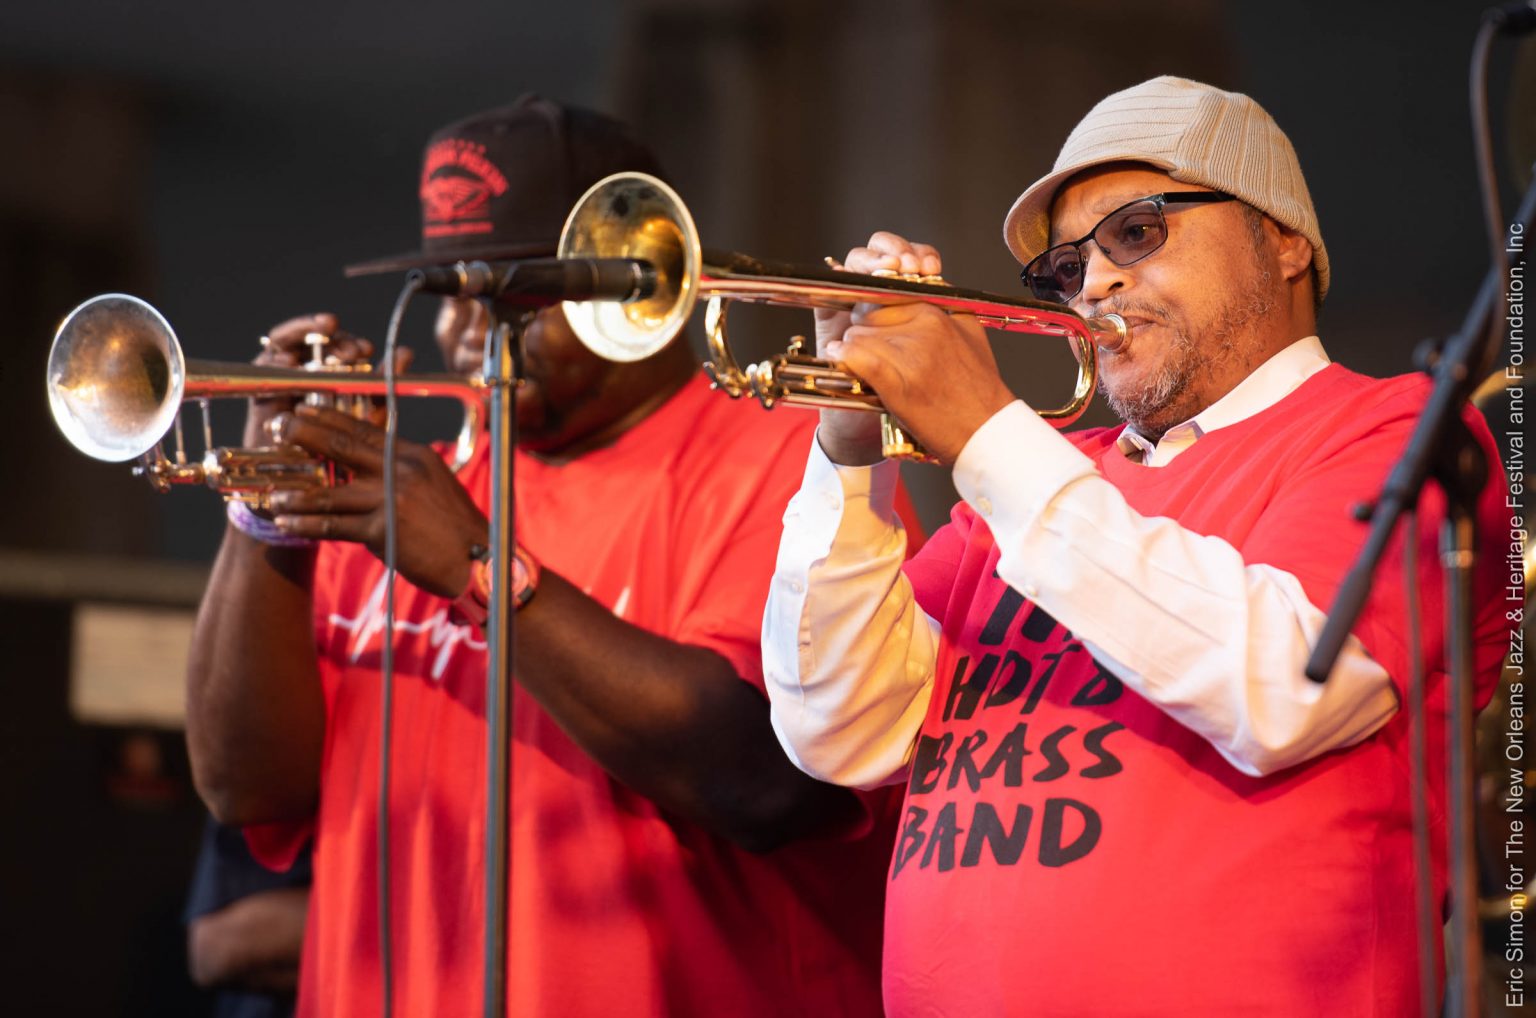 2019 Treme Creole Gumbo Festival, Hot 8 Brass Band